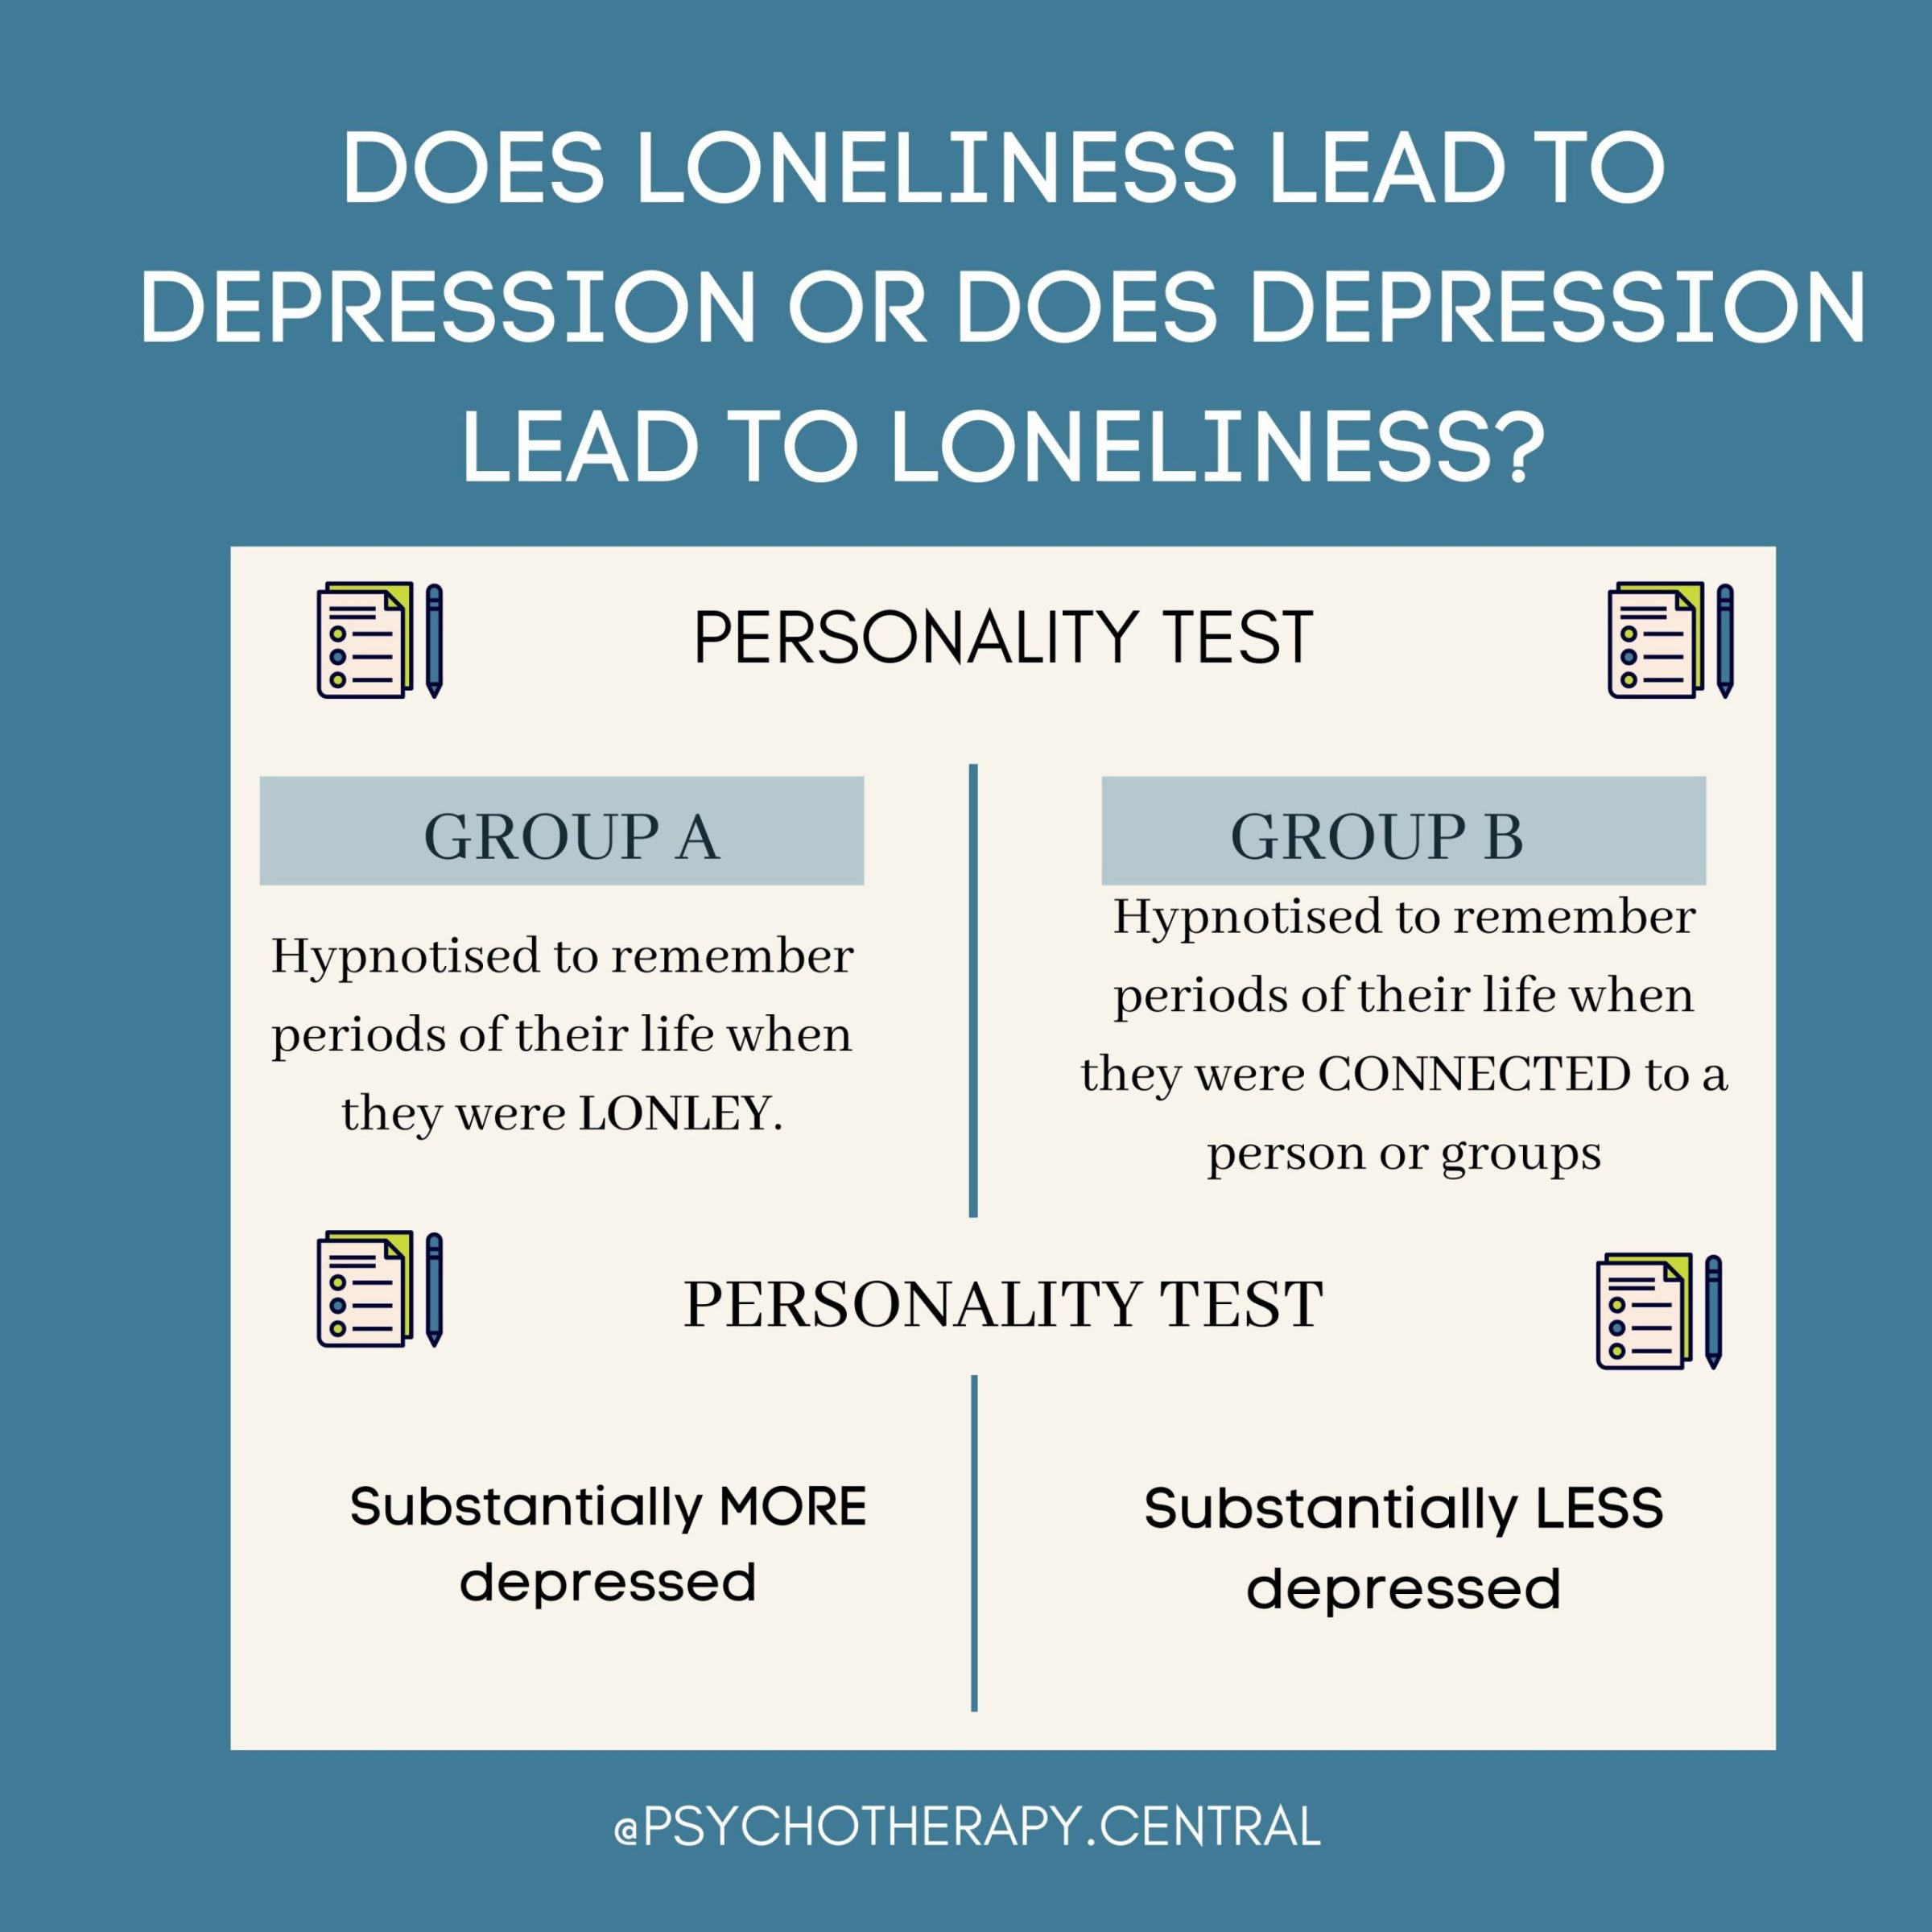 Does Depression Lead to Loneliness or Does Loneliness Lead to Depression?